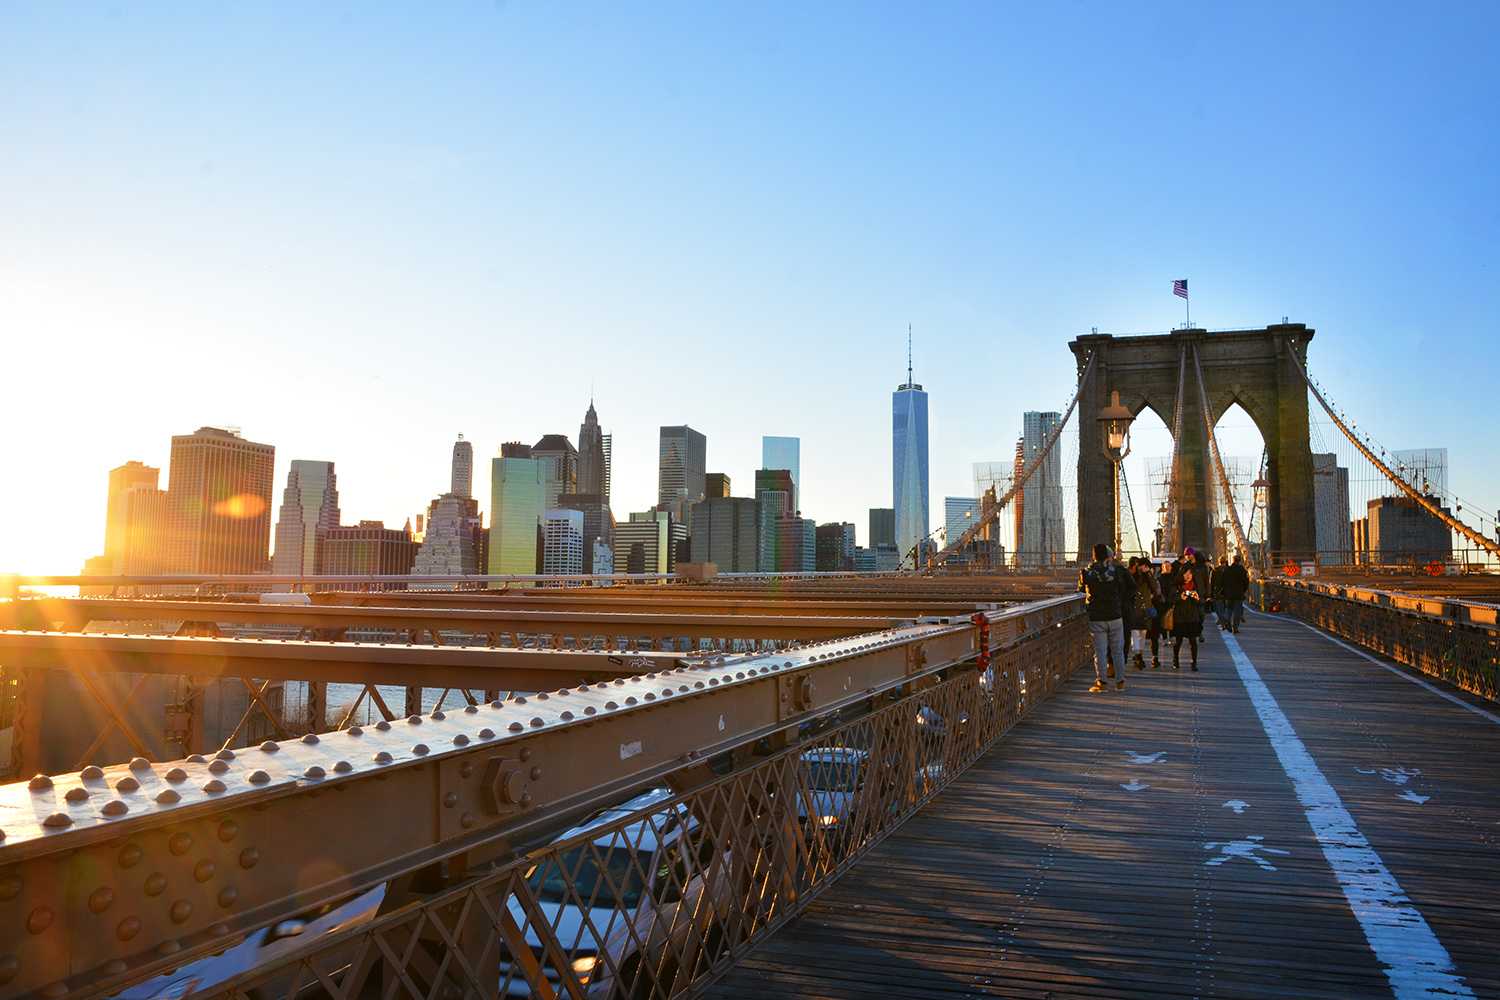 The Brooklyn Bridge was completed in 1883 and is just shy of 6,000 feet long. 